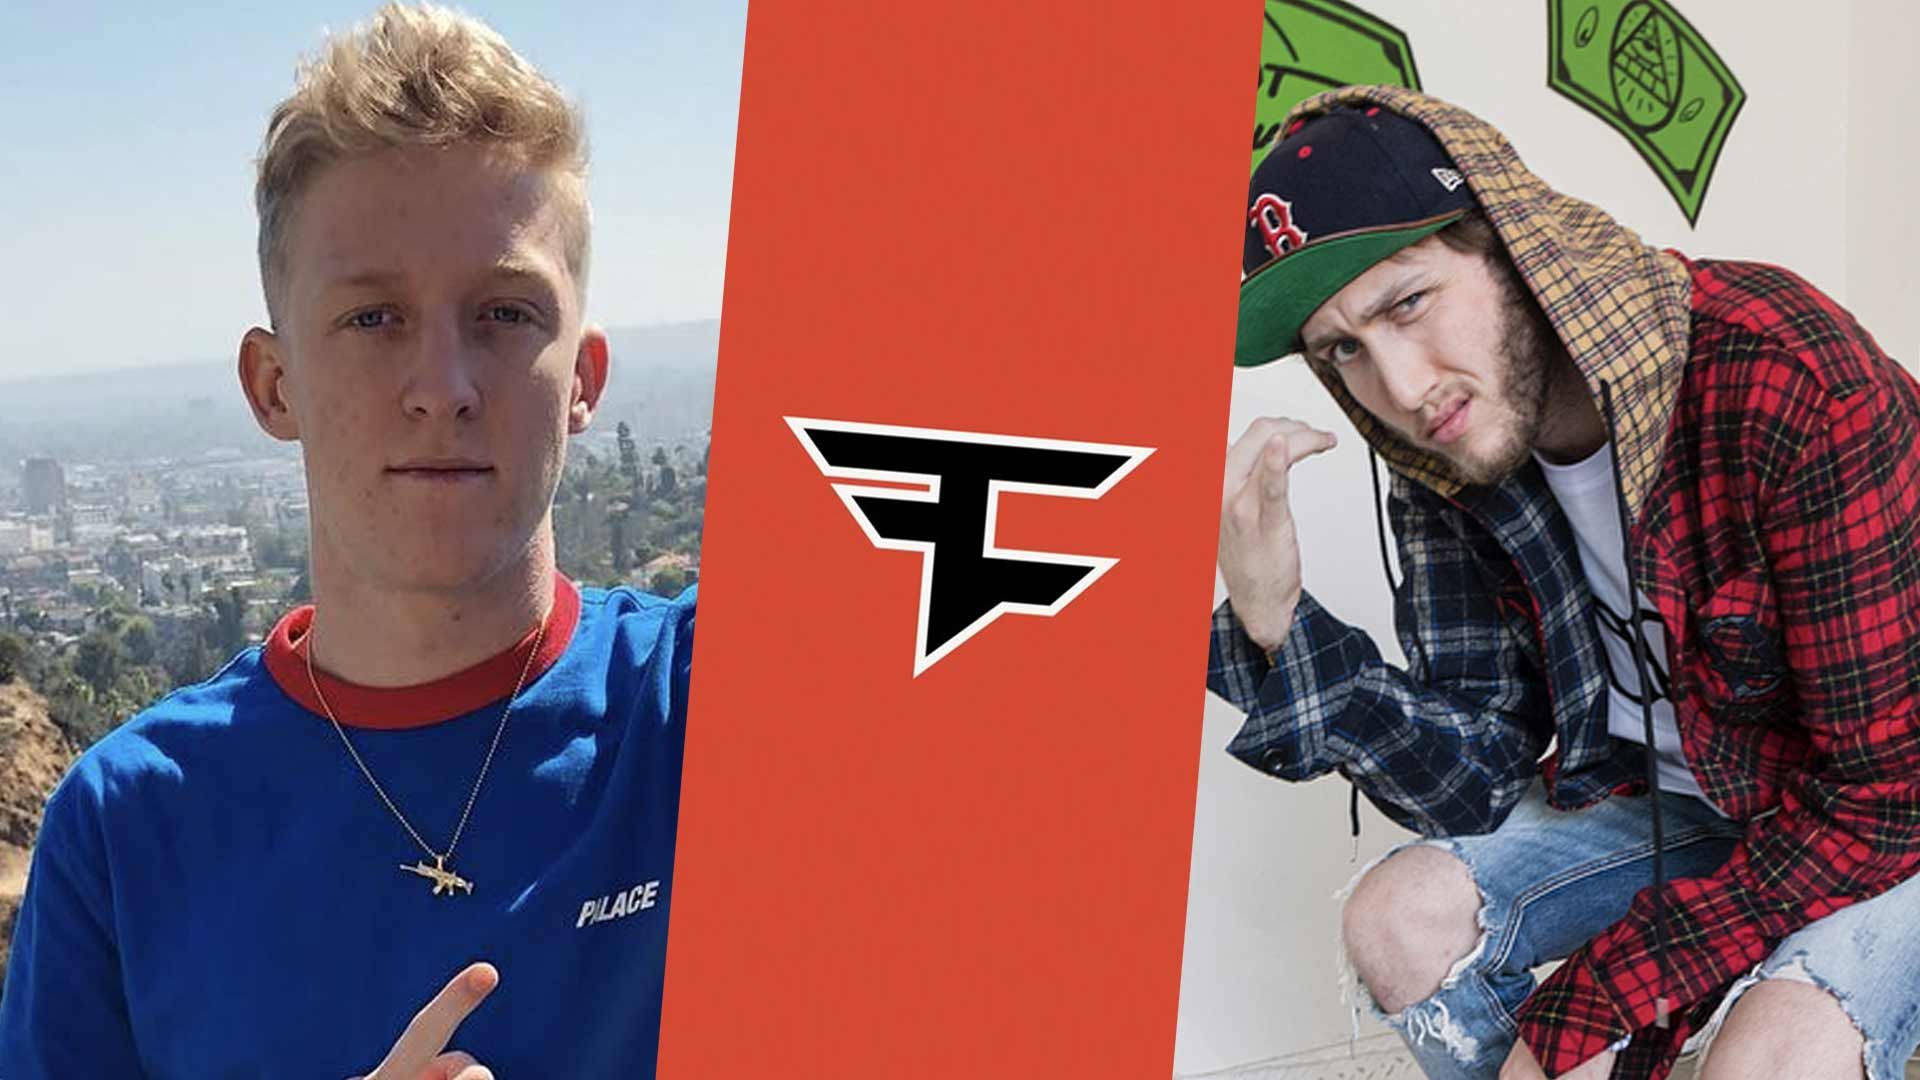 Tfue faze banks with dick in mouth